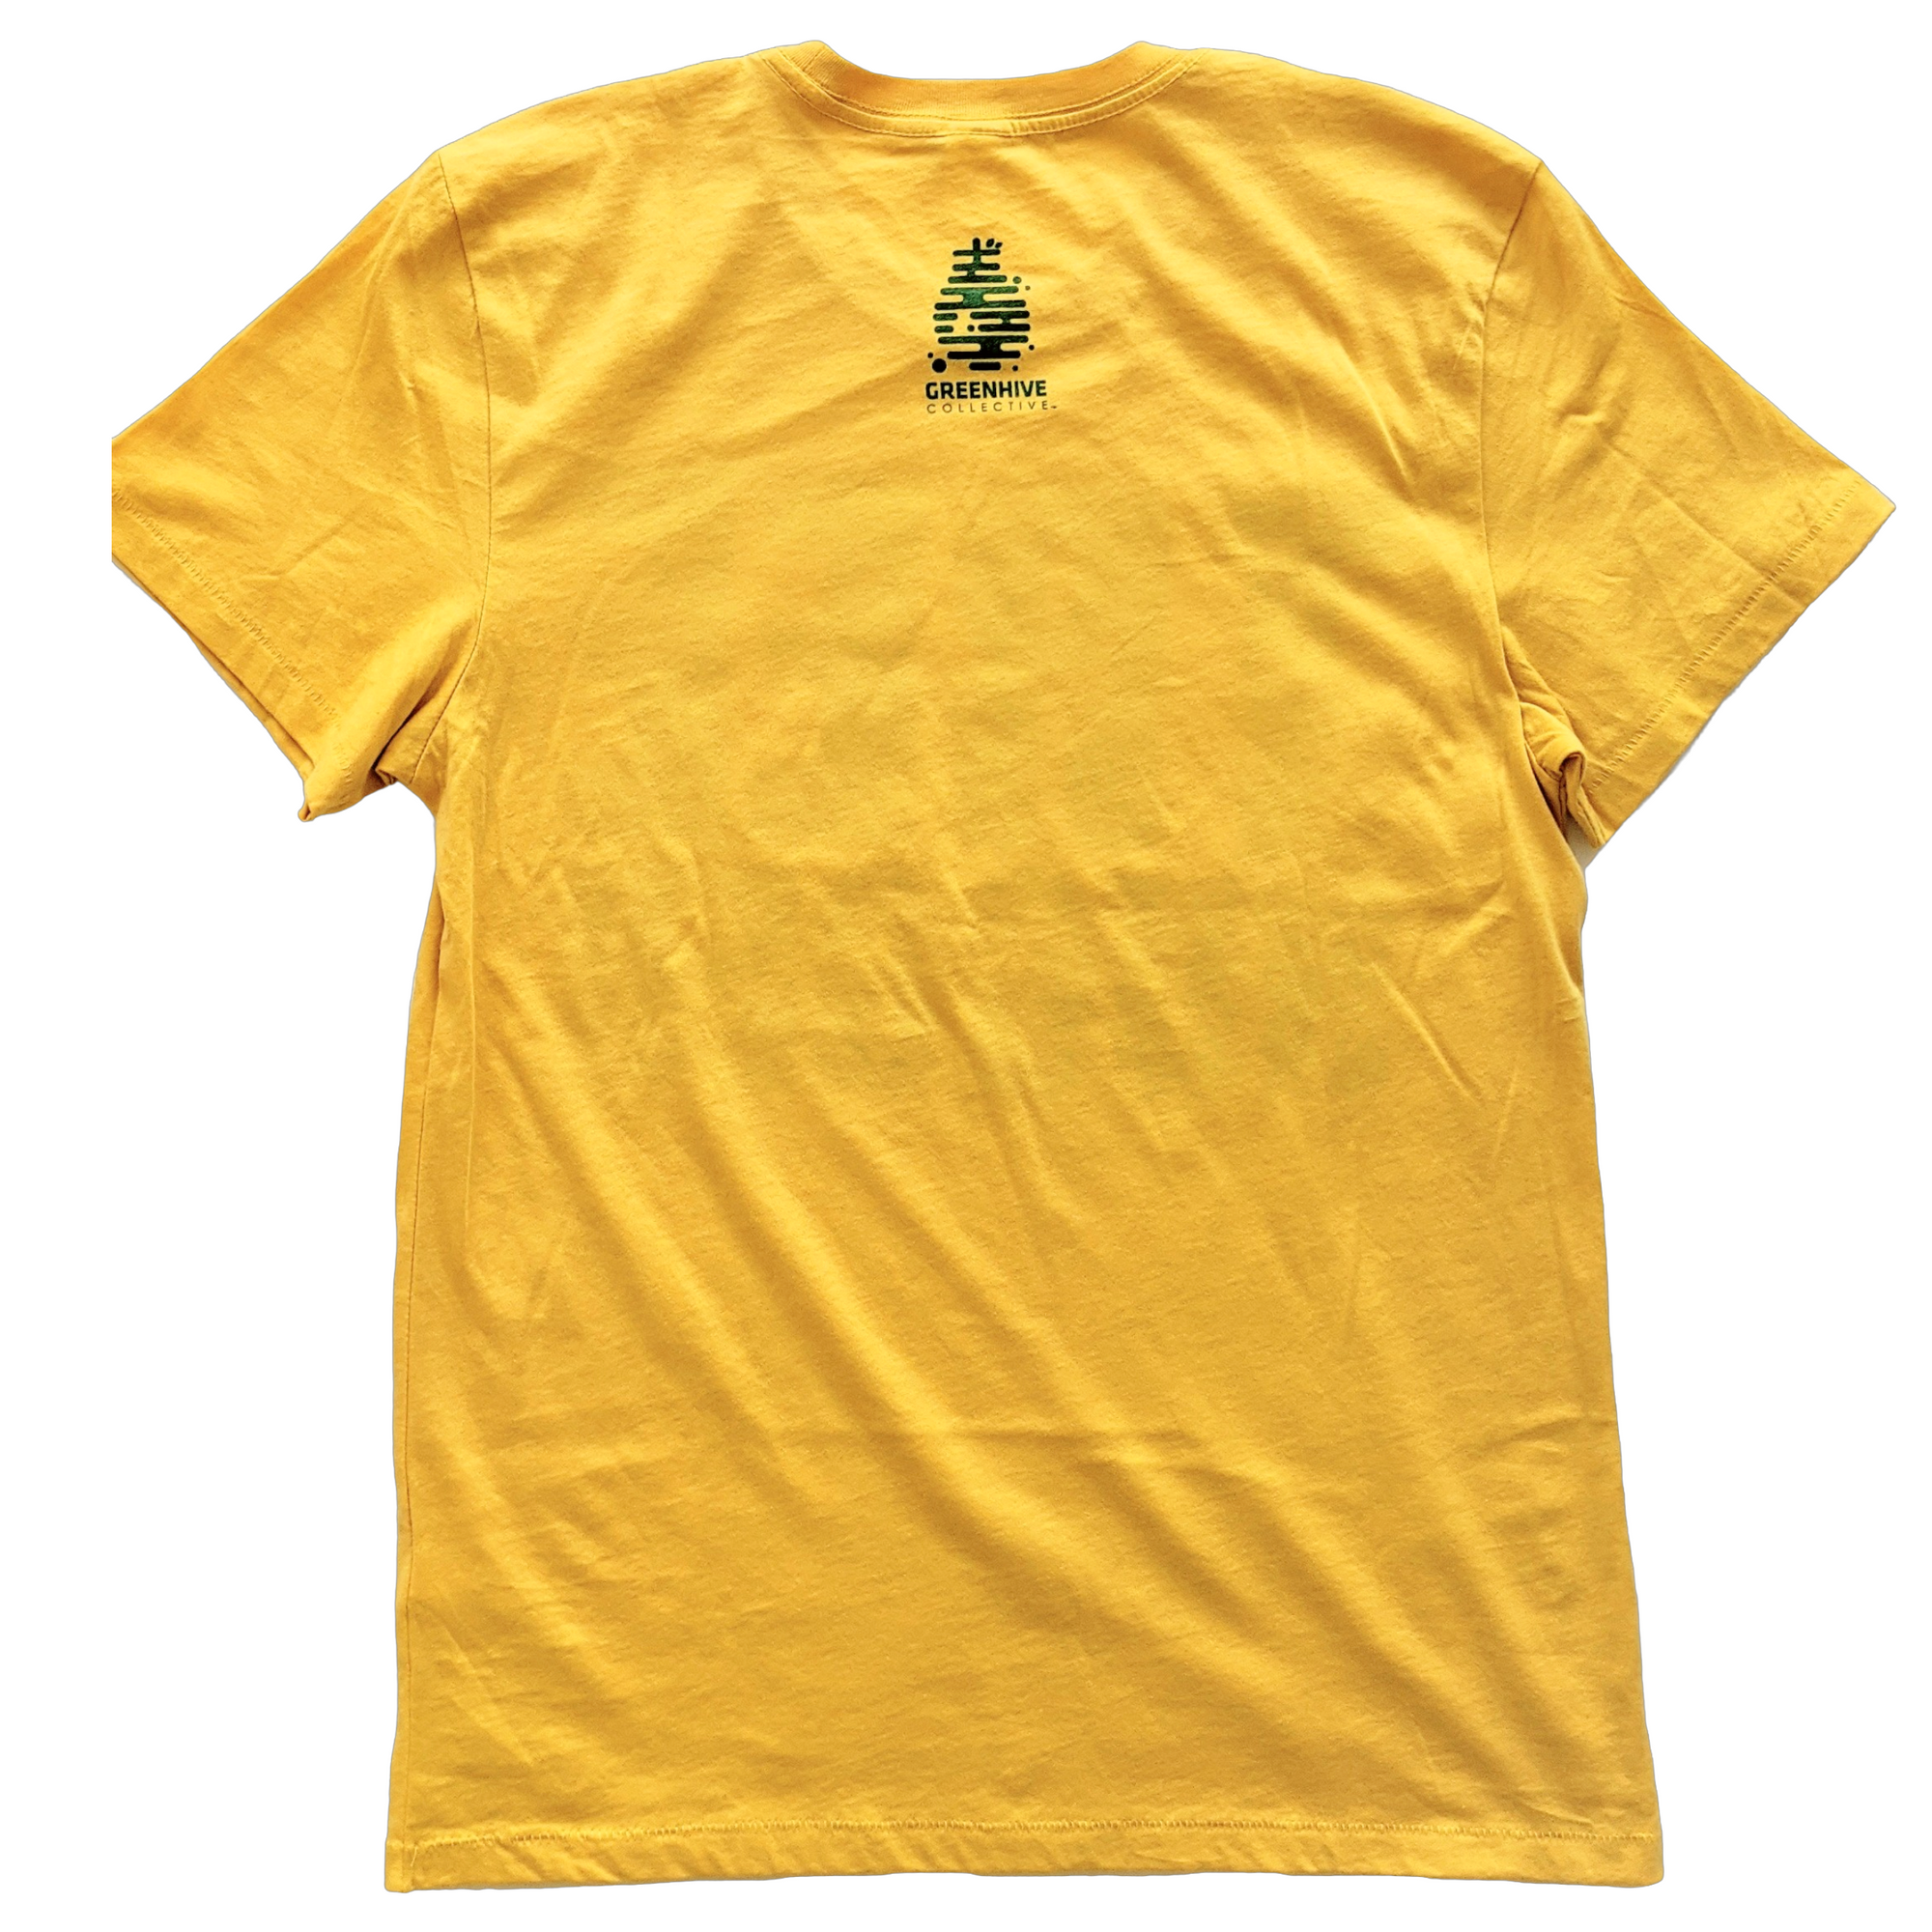 Tree Hugger (Forest) - GreenHive Collective - ECO-FRIENDLY APPAREL